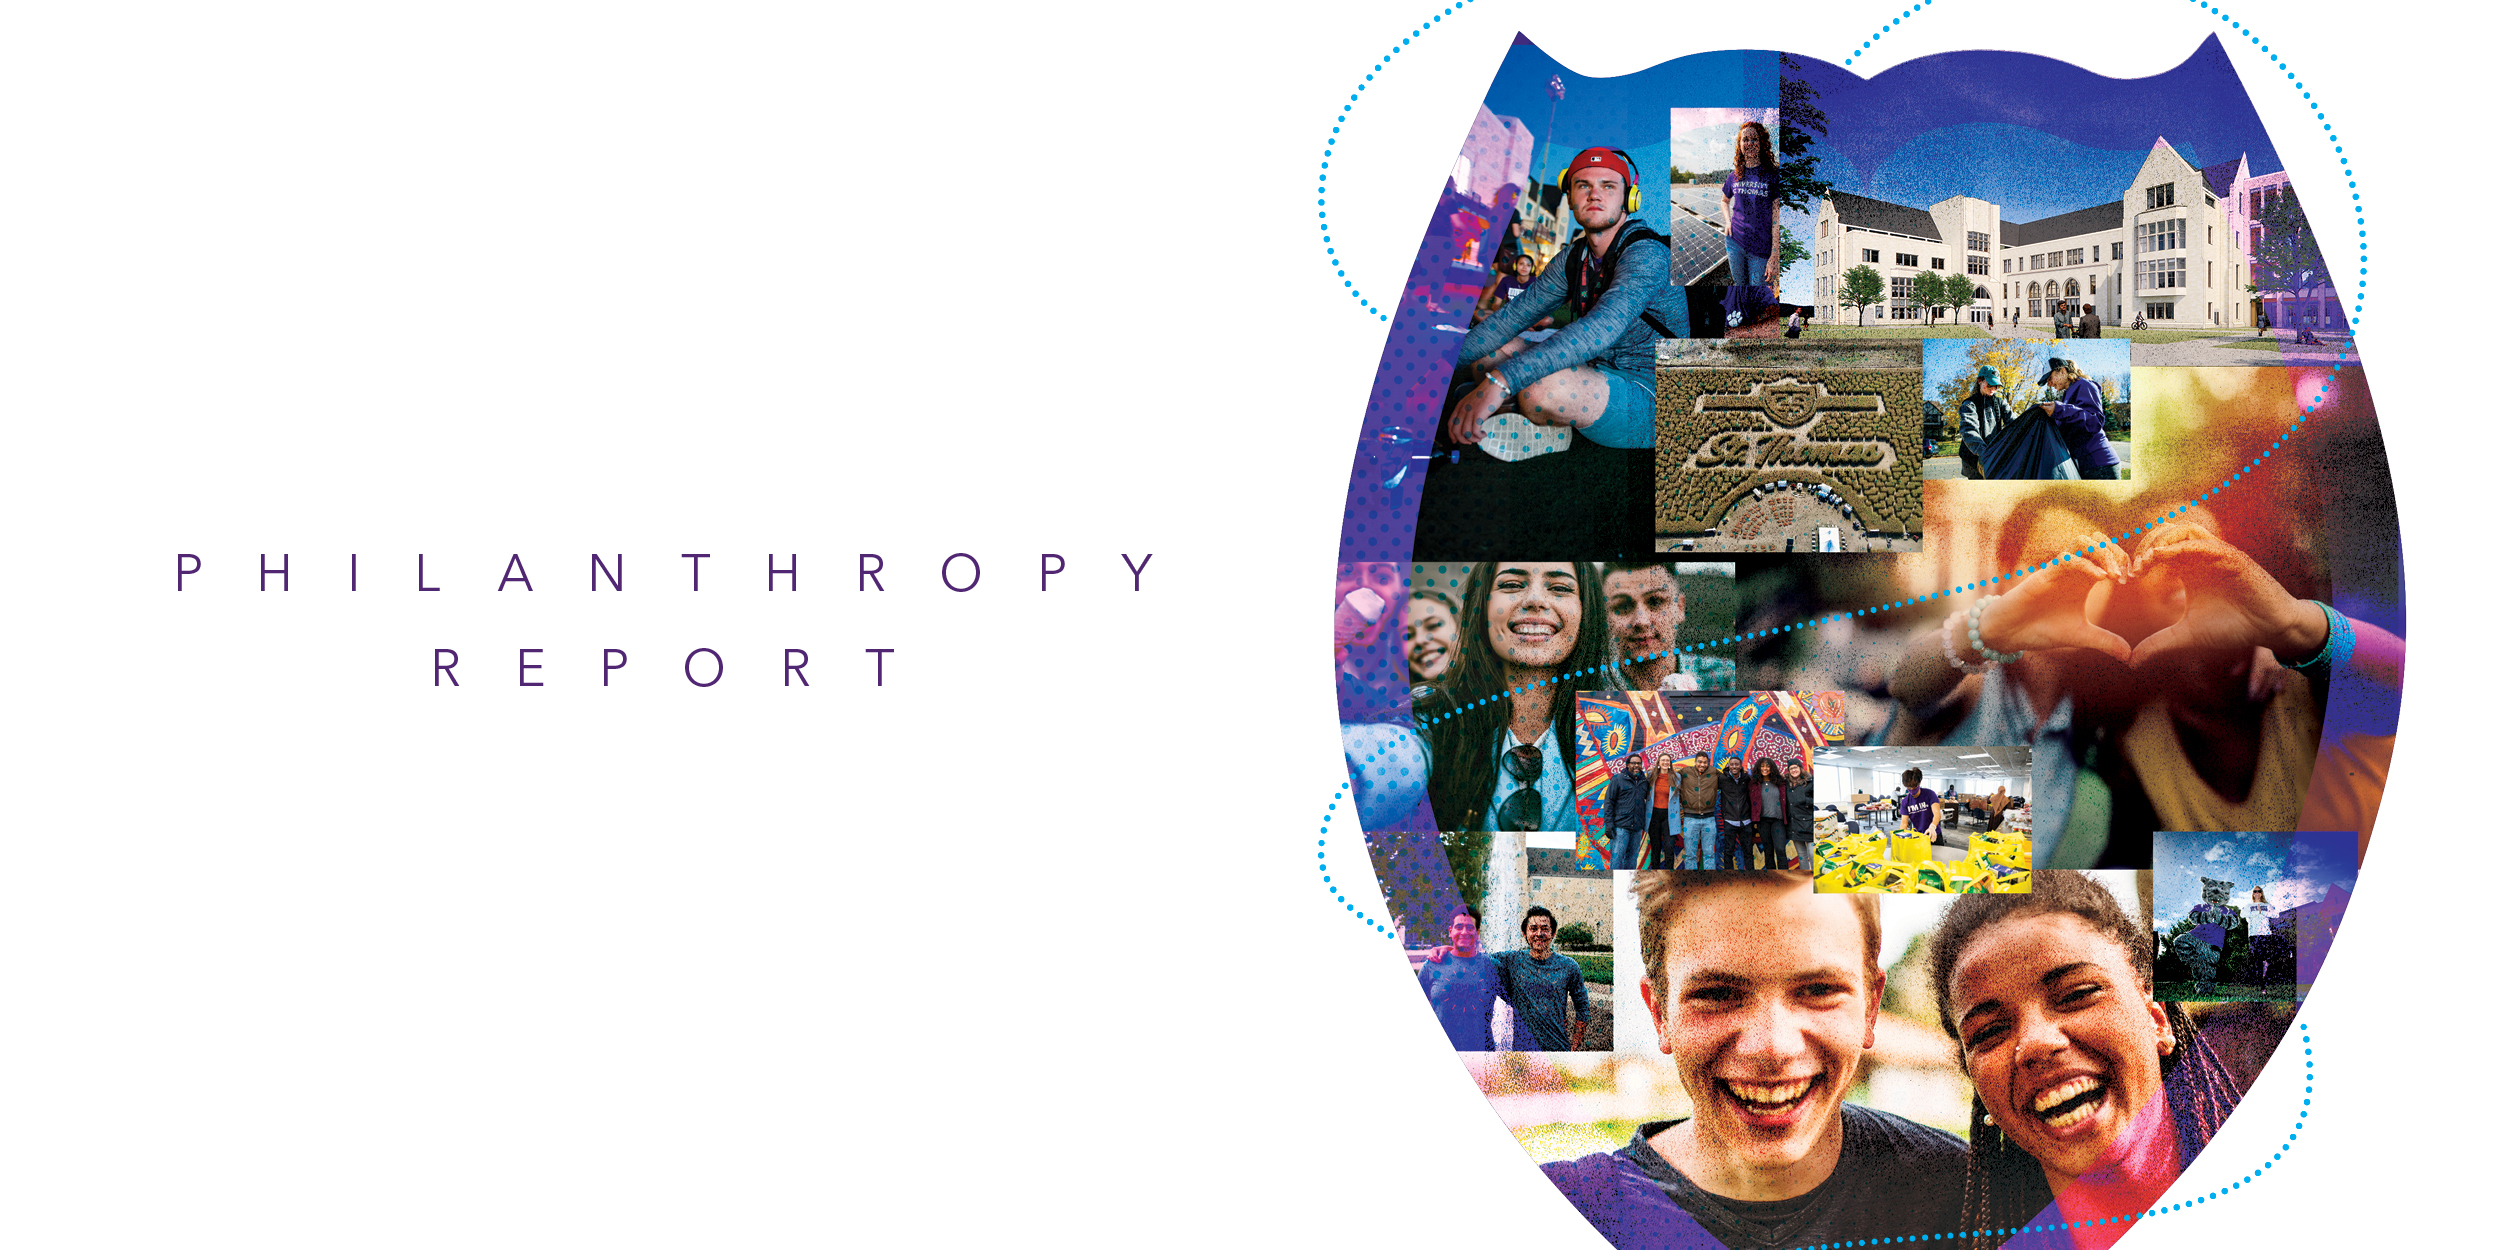 The St. Thomas shield shape filled with images of grateful students and fundraising initiatives